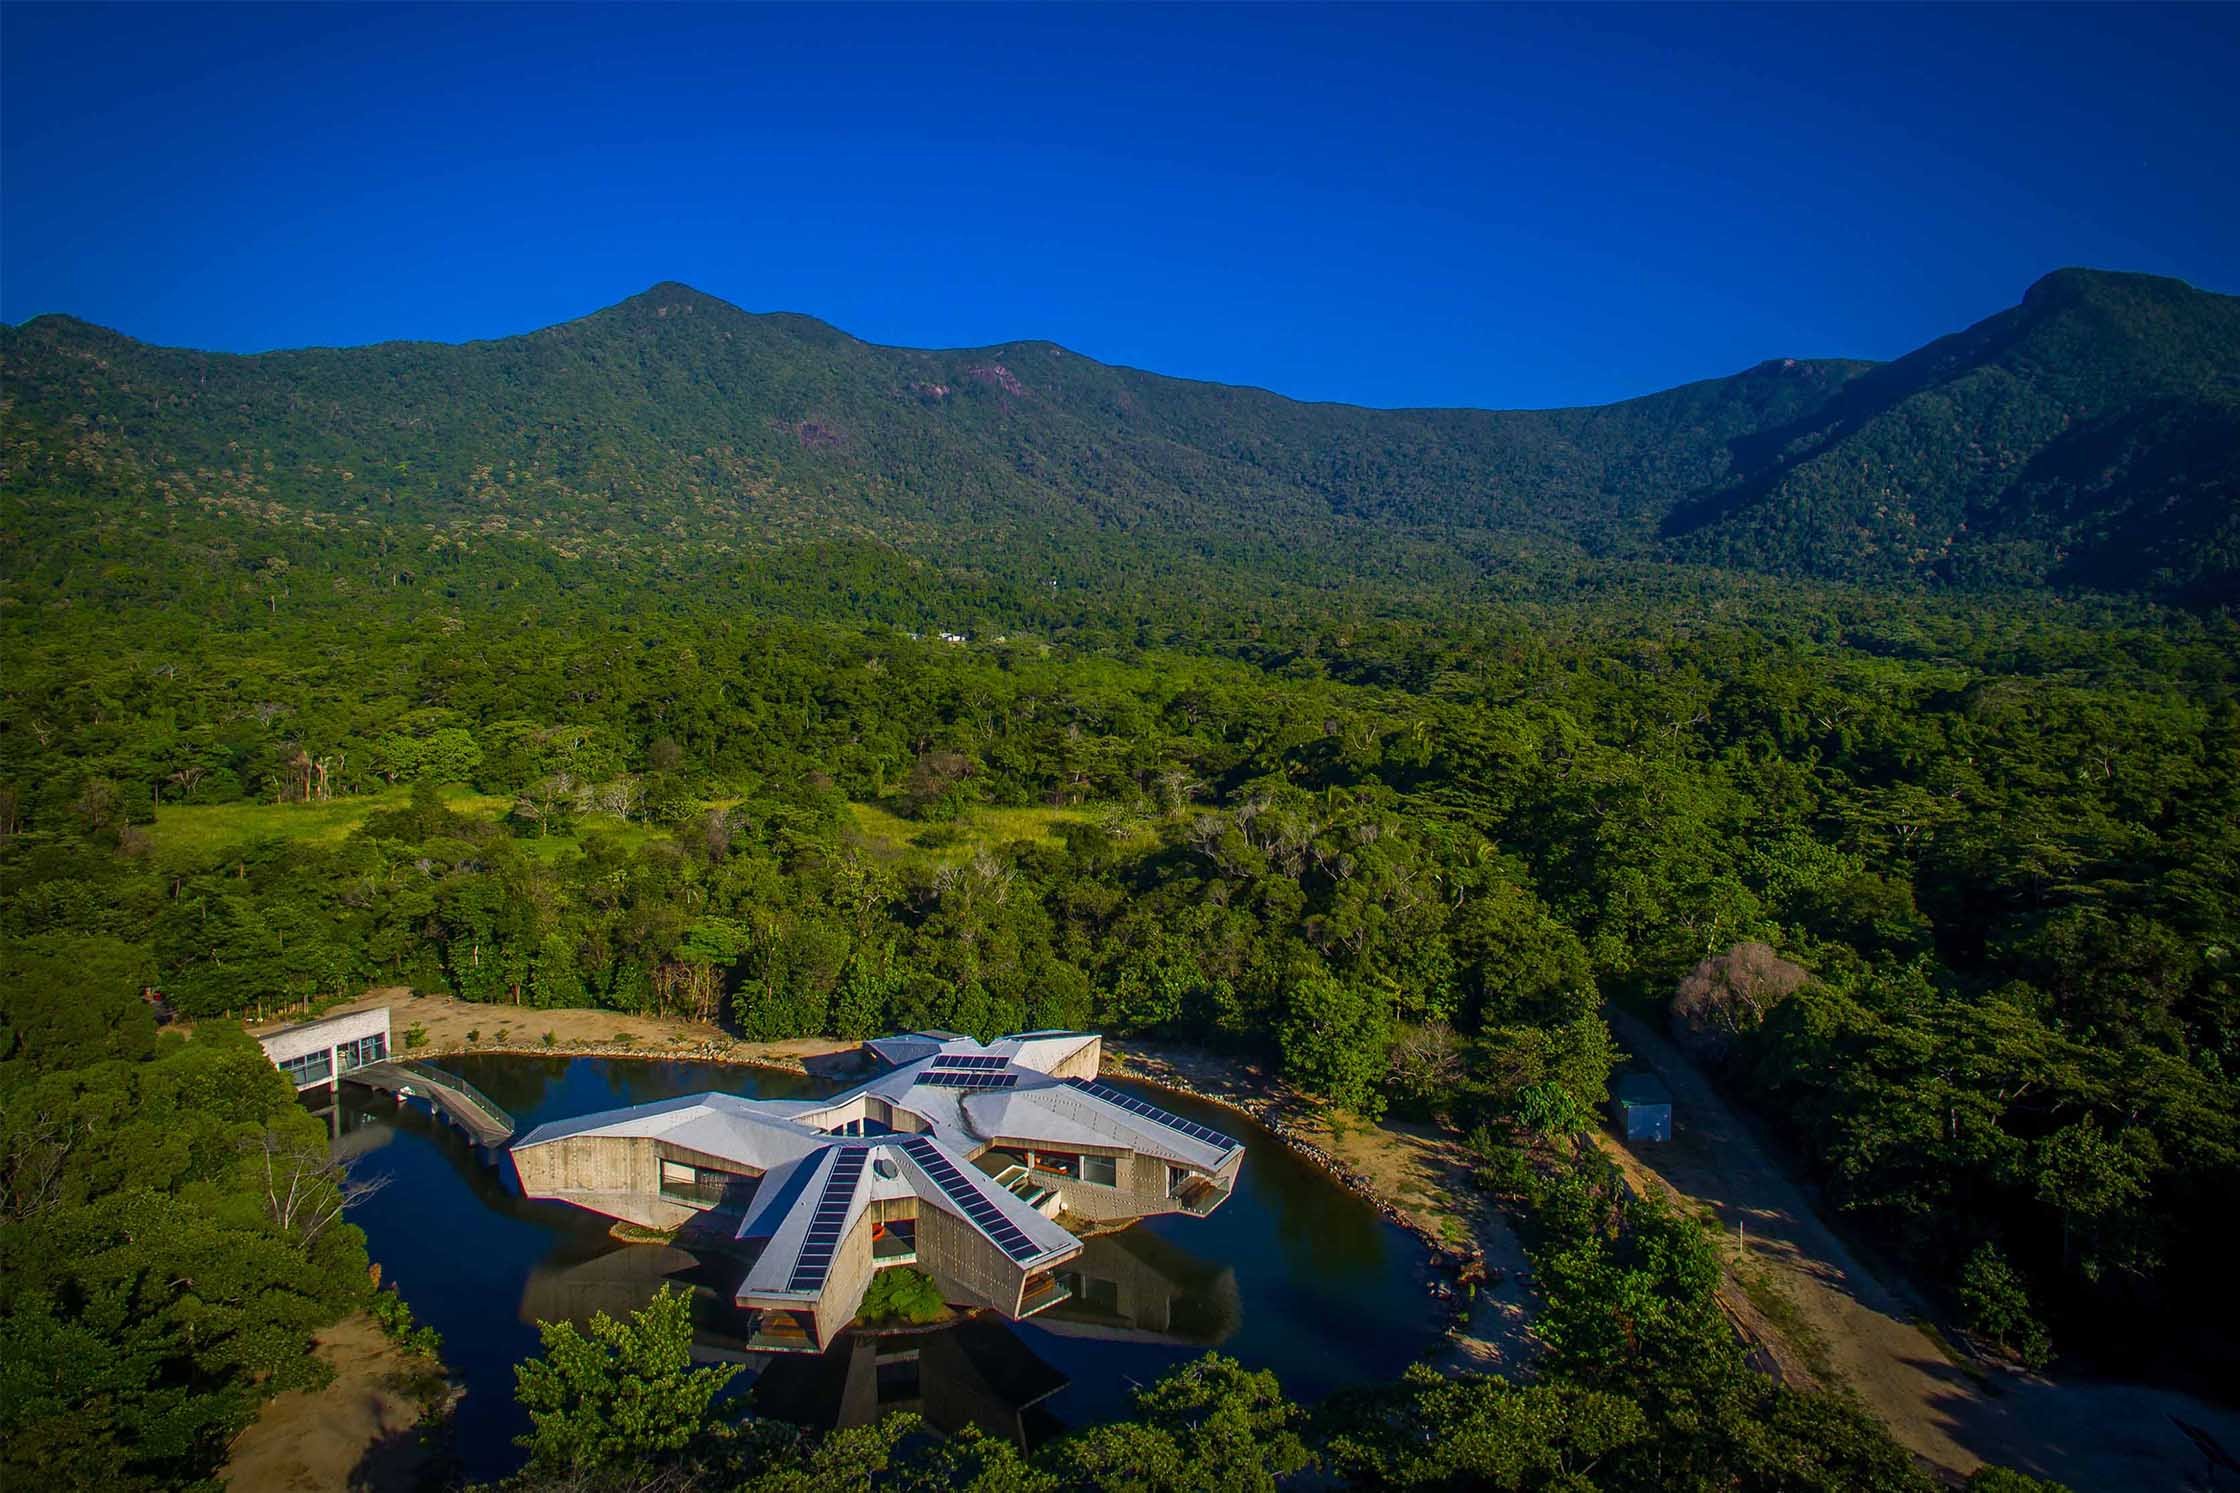 Alkira Resort House from a birdeye view - perched in a lake nestled in a rainforest in Northern Queensland, Australia